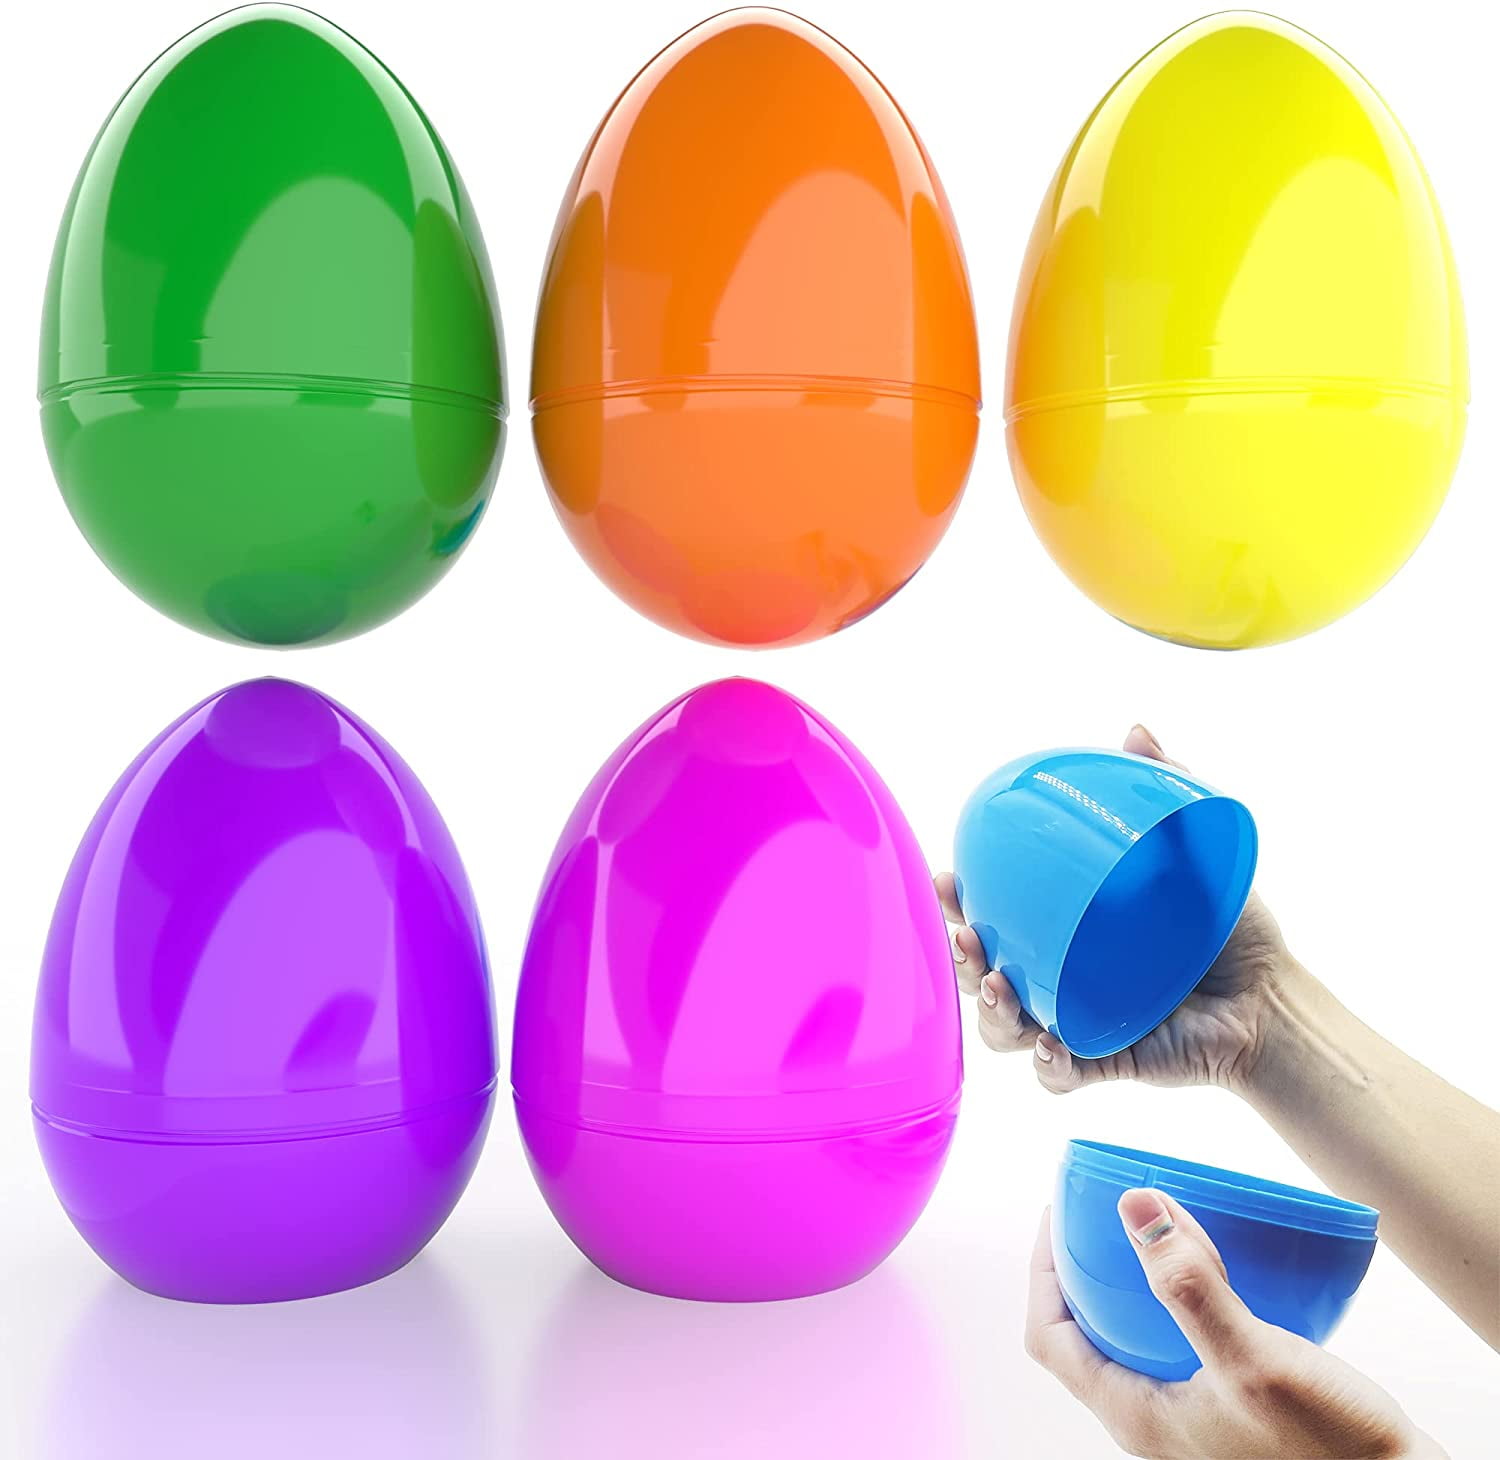 20/Plastic Easter Eggs Bright Egg Hunt DIY Decoration Toy New Year Kids Gifts 